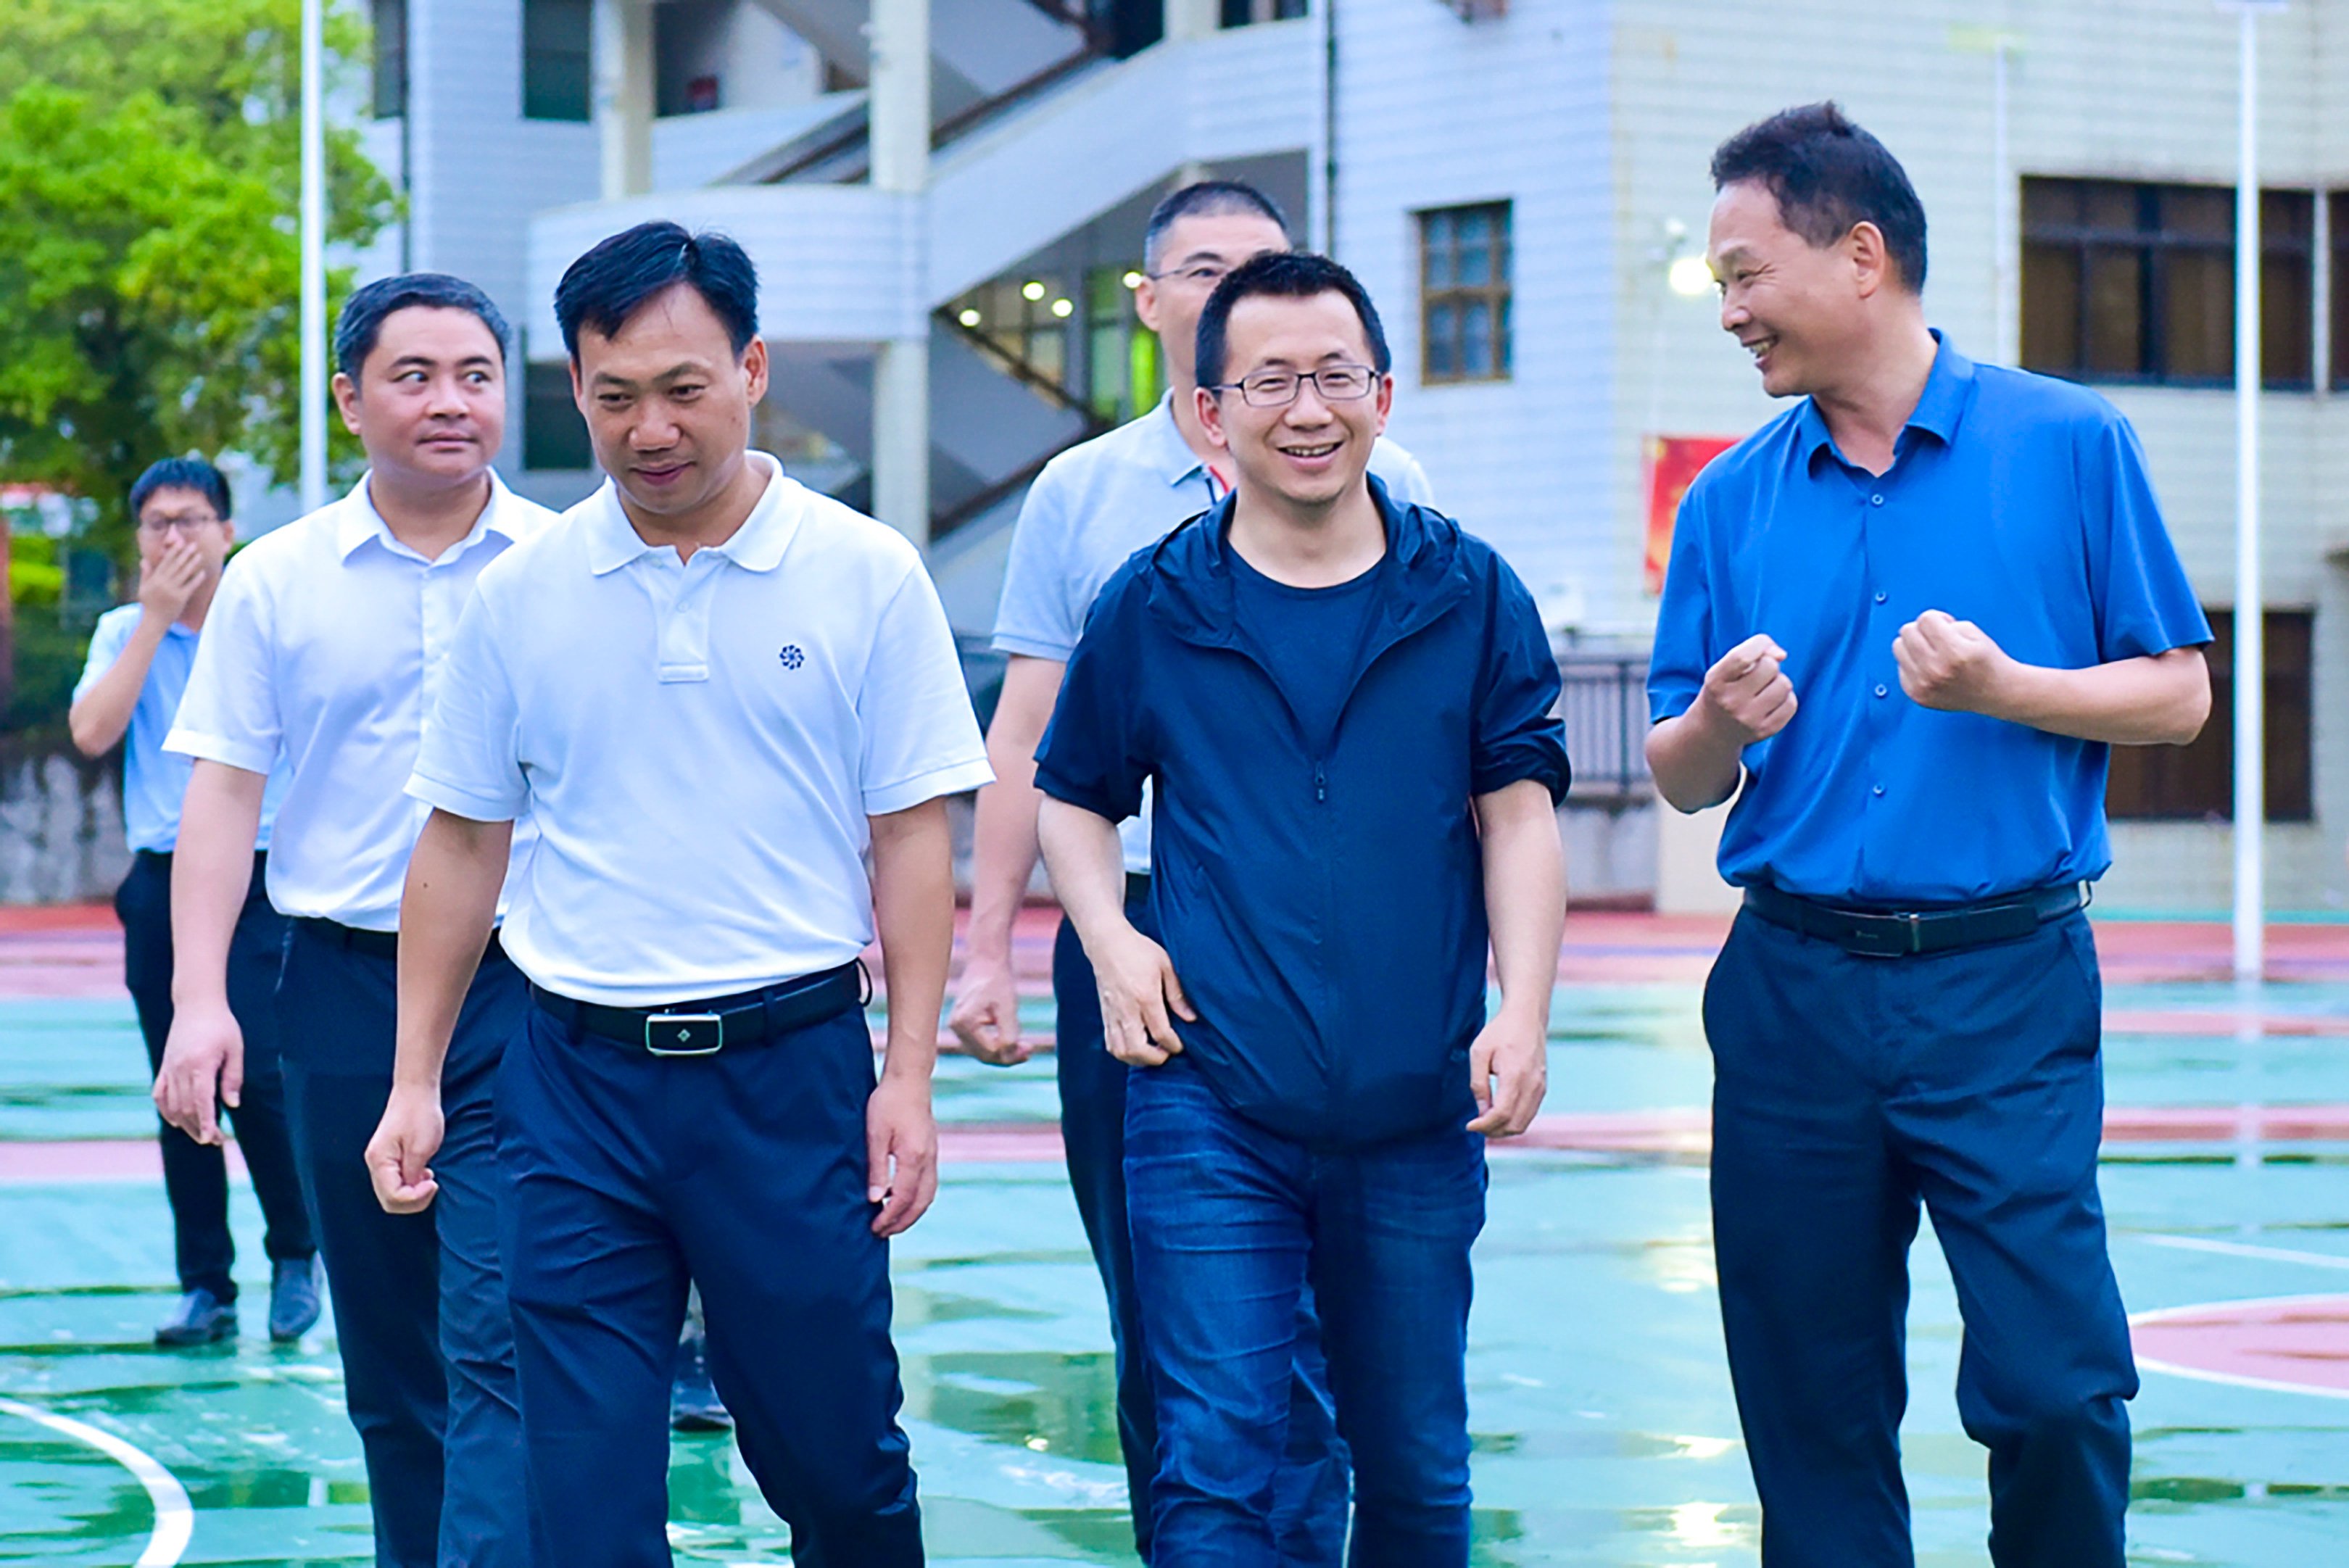 Zhang (centre) has maintained a low profile since stepping down as chairman of ByteDance in 2021. Photo: Longyan Education Bureau